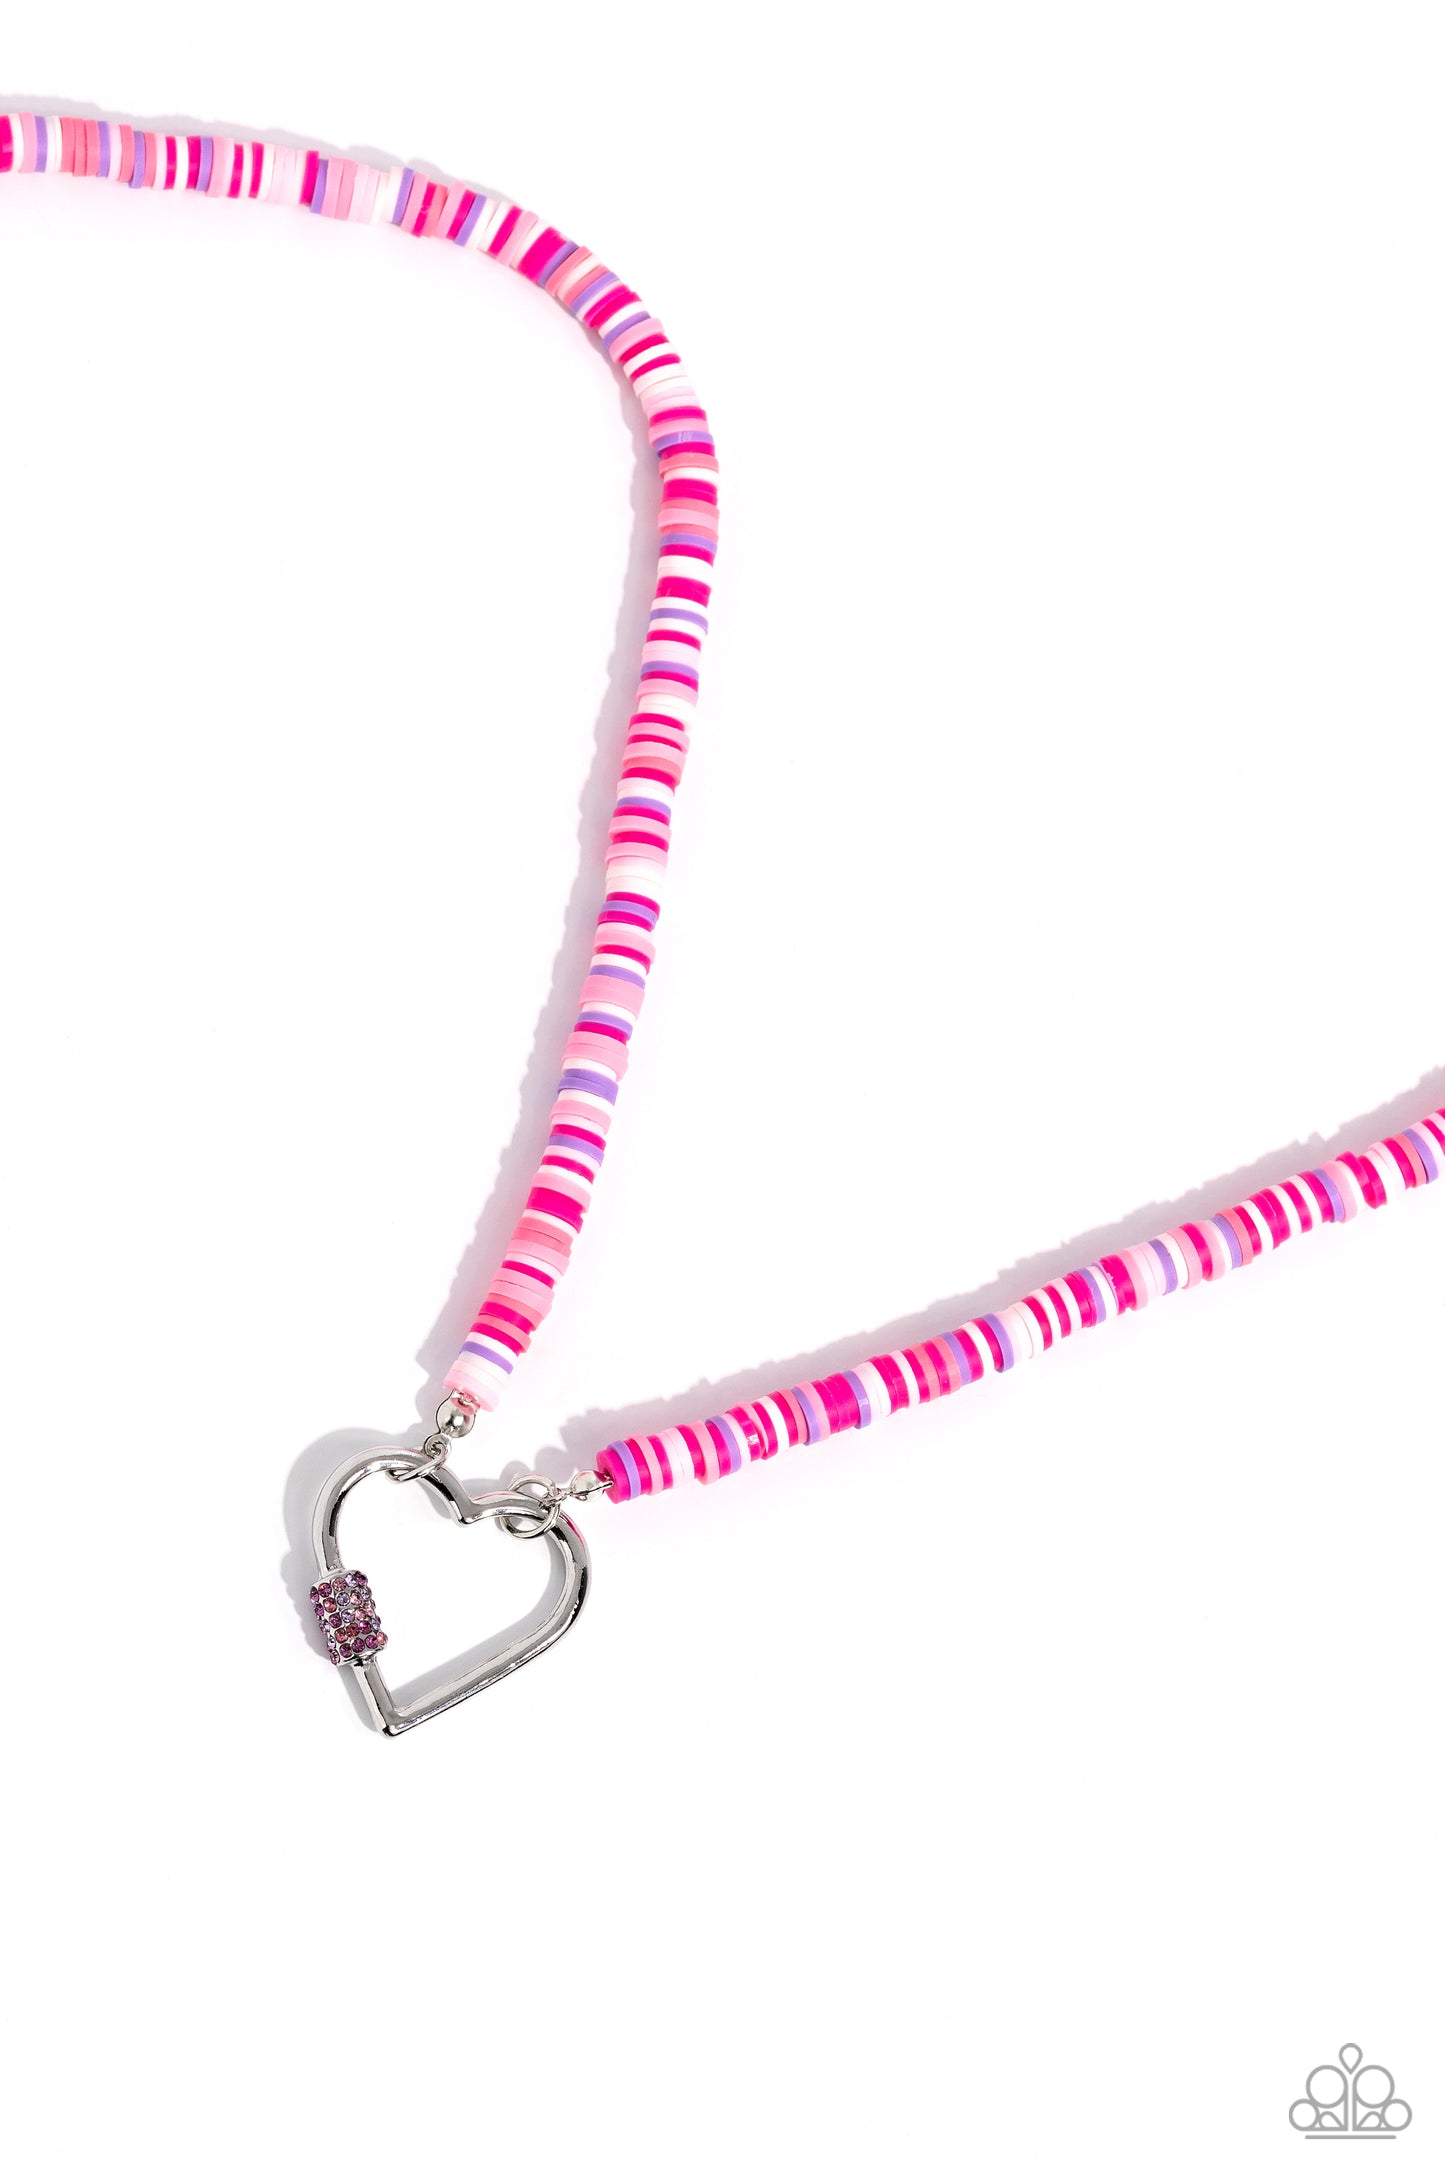 Clearly Carabiner - pink - Paparazzi necklace